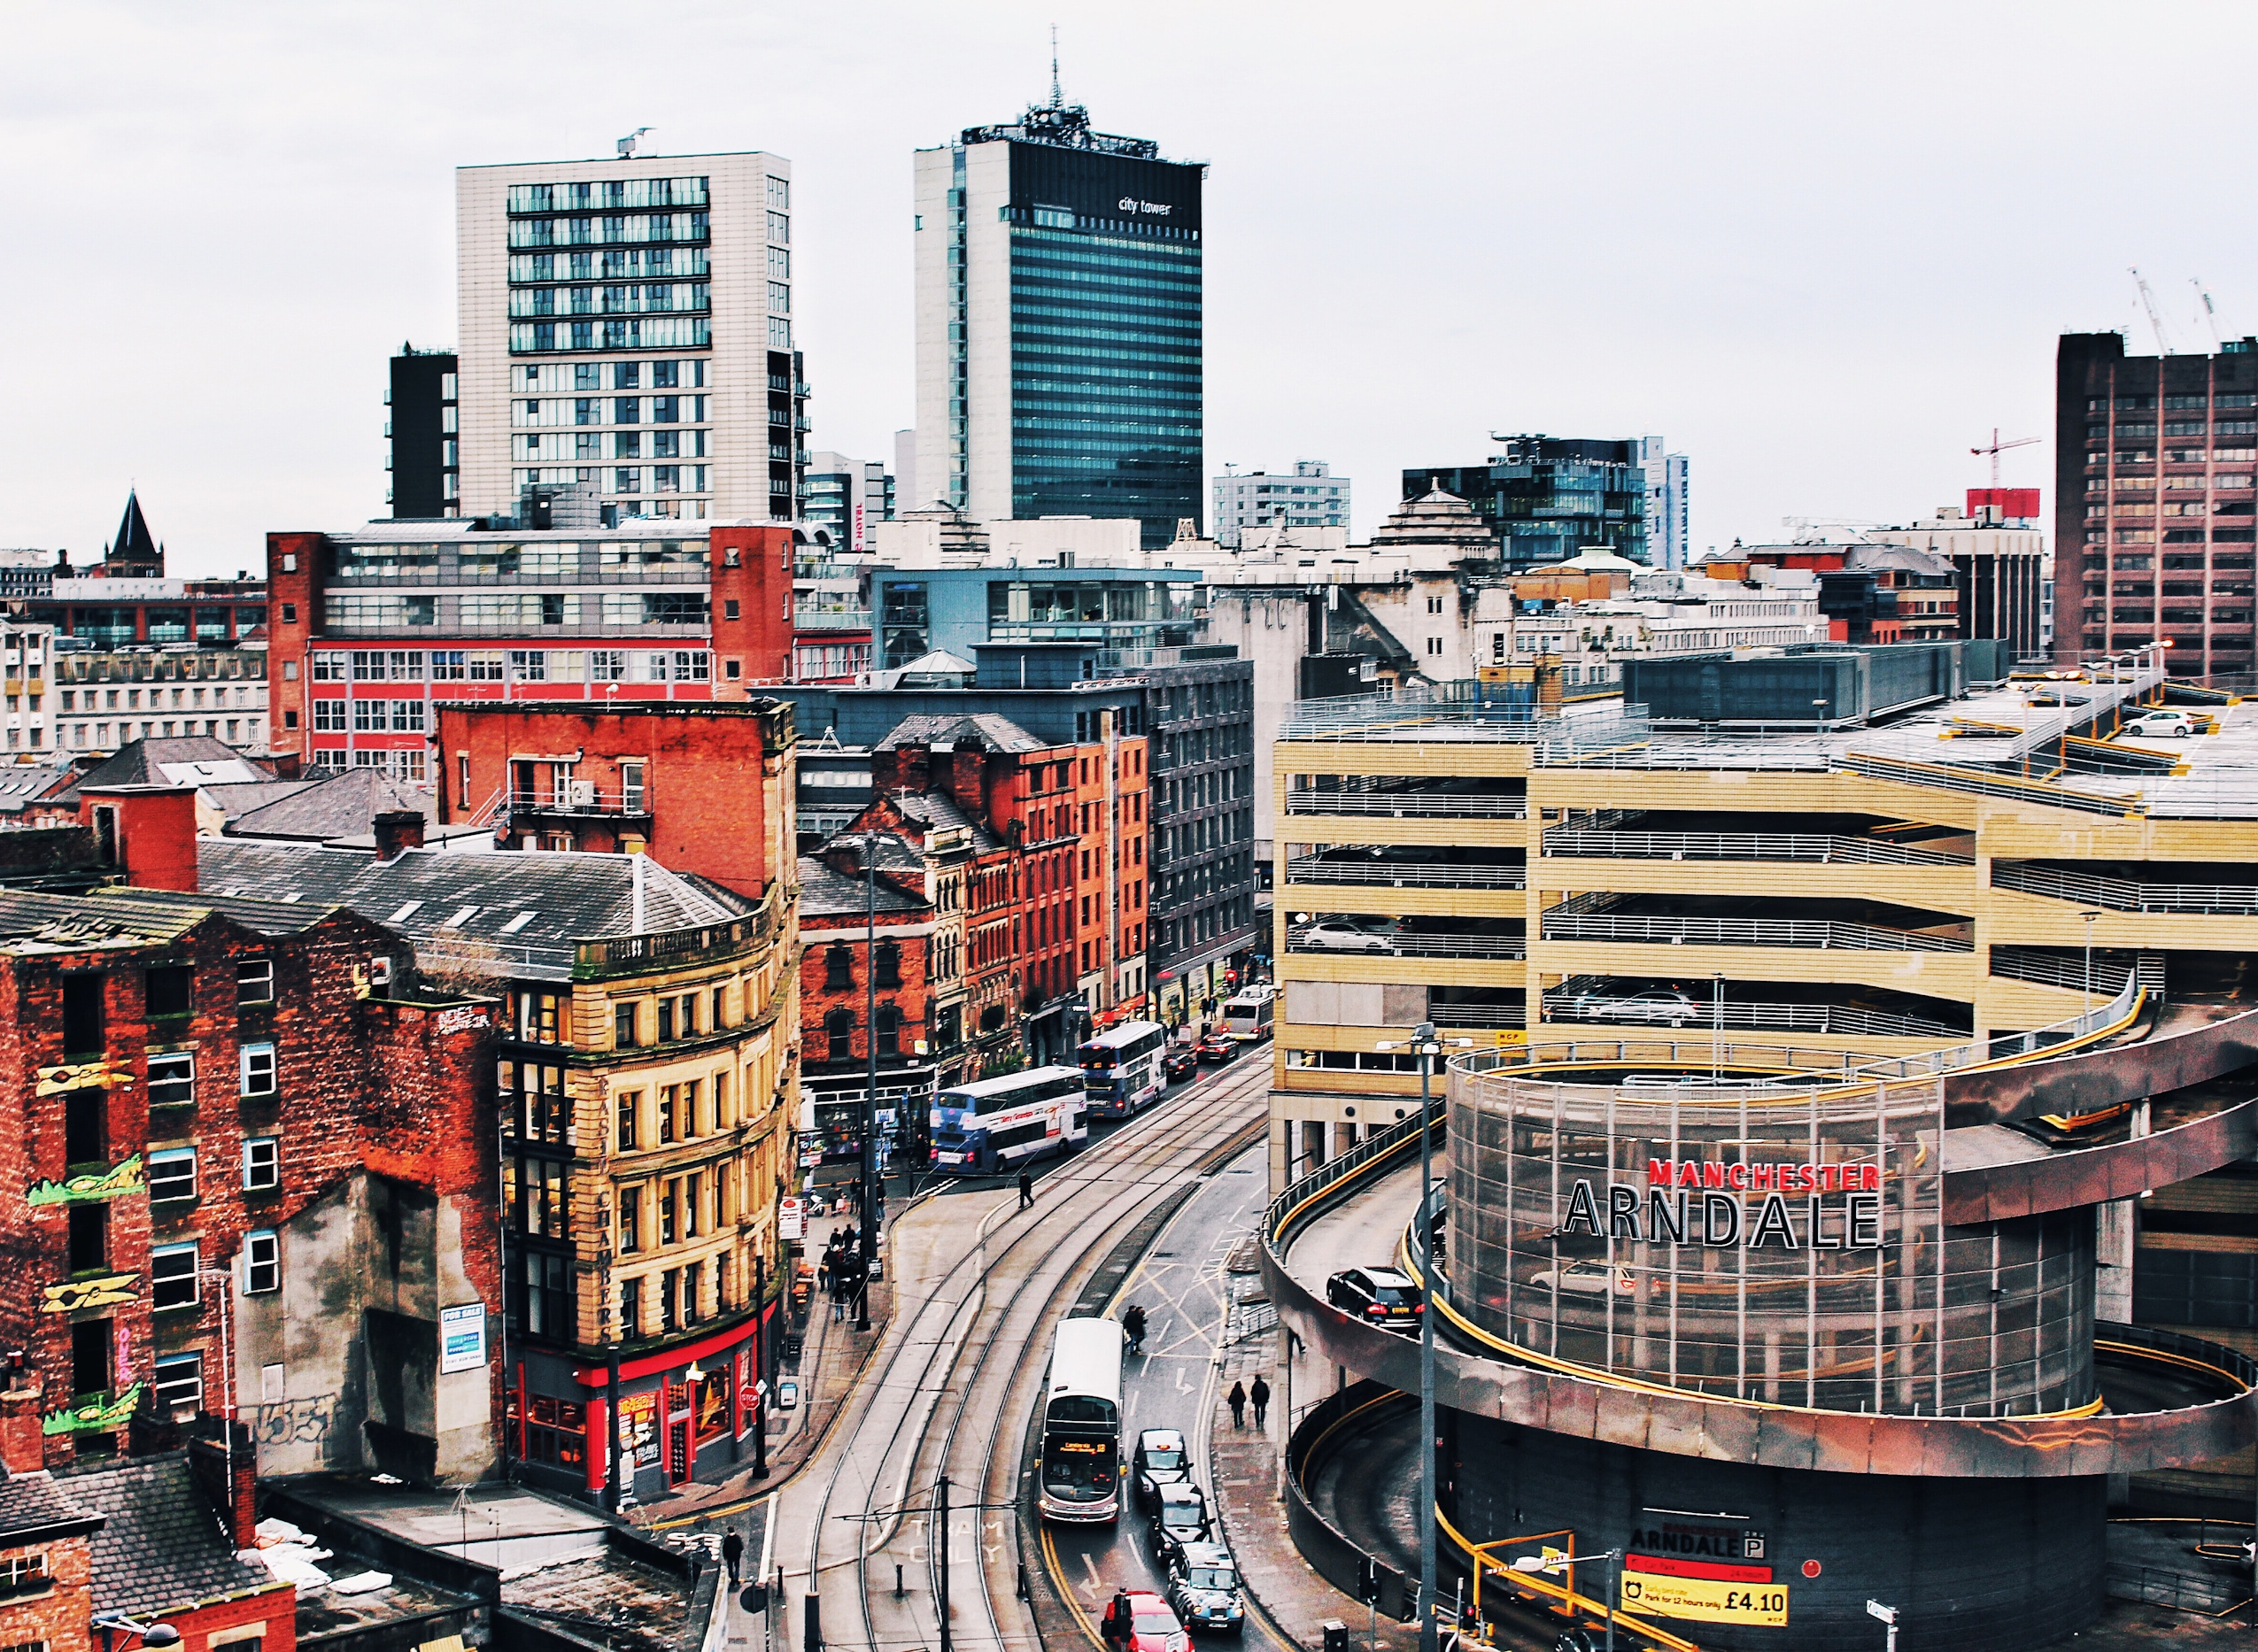 A view from Manchester: how to expand internationally